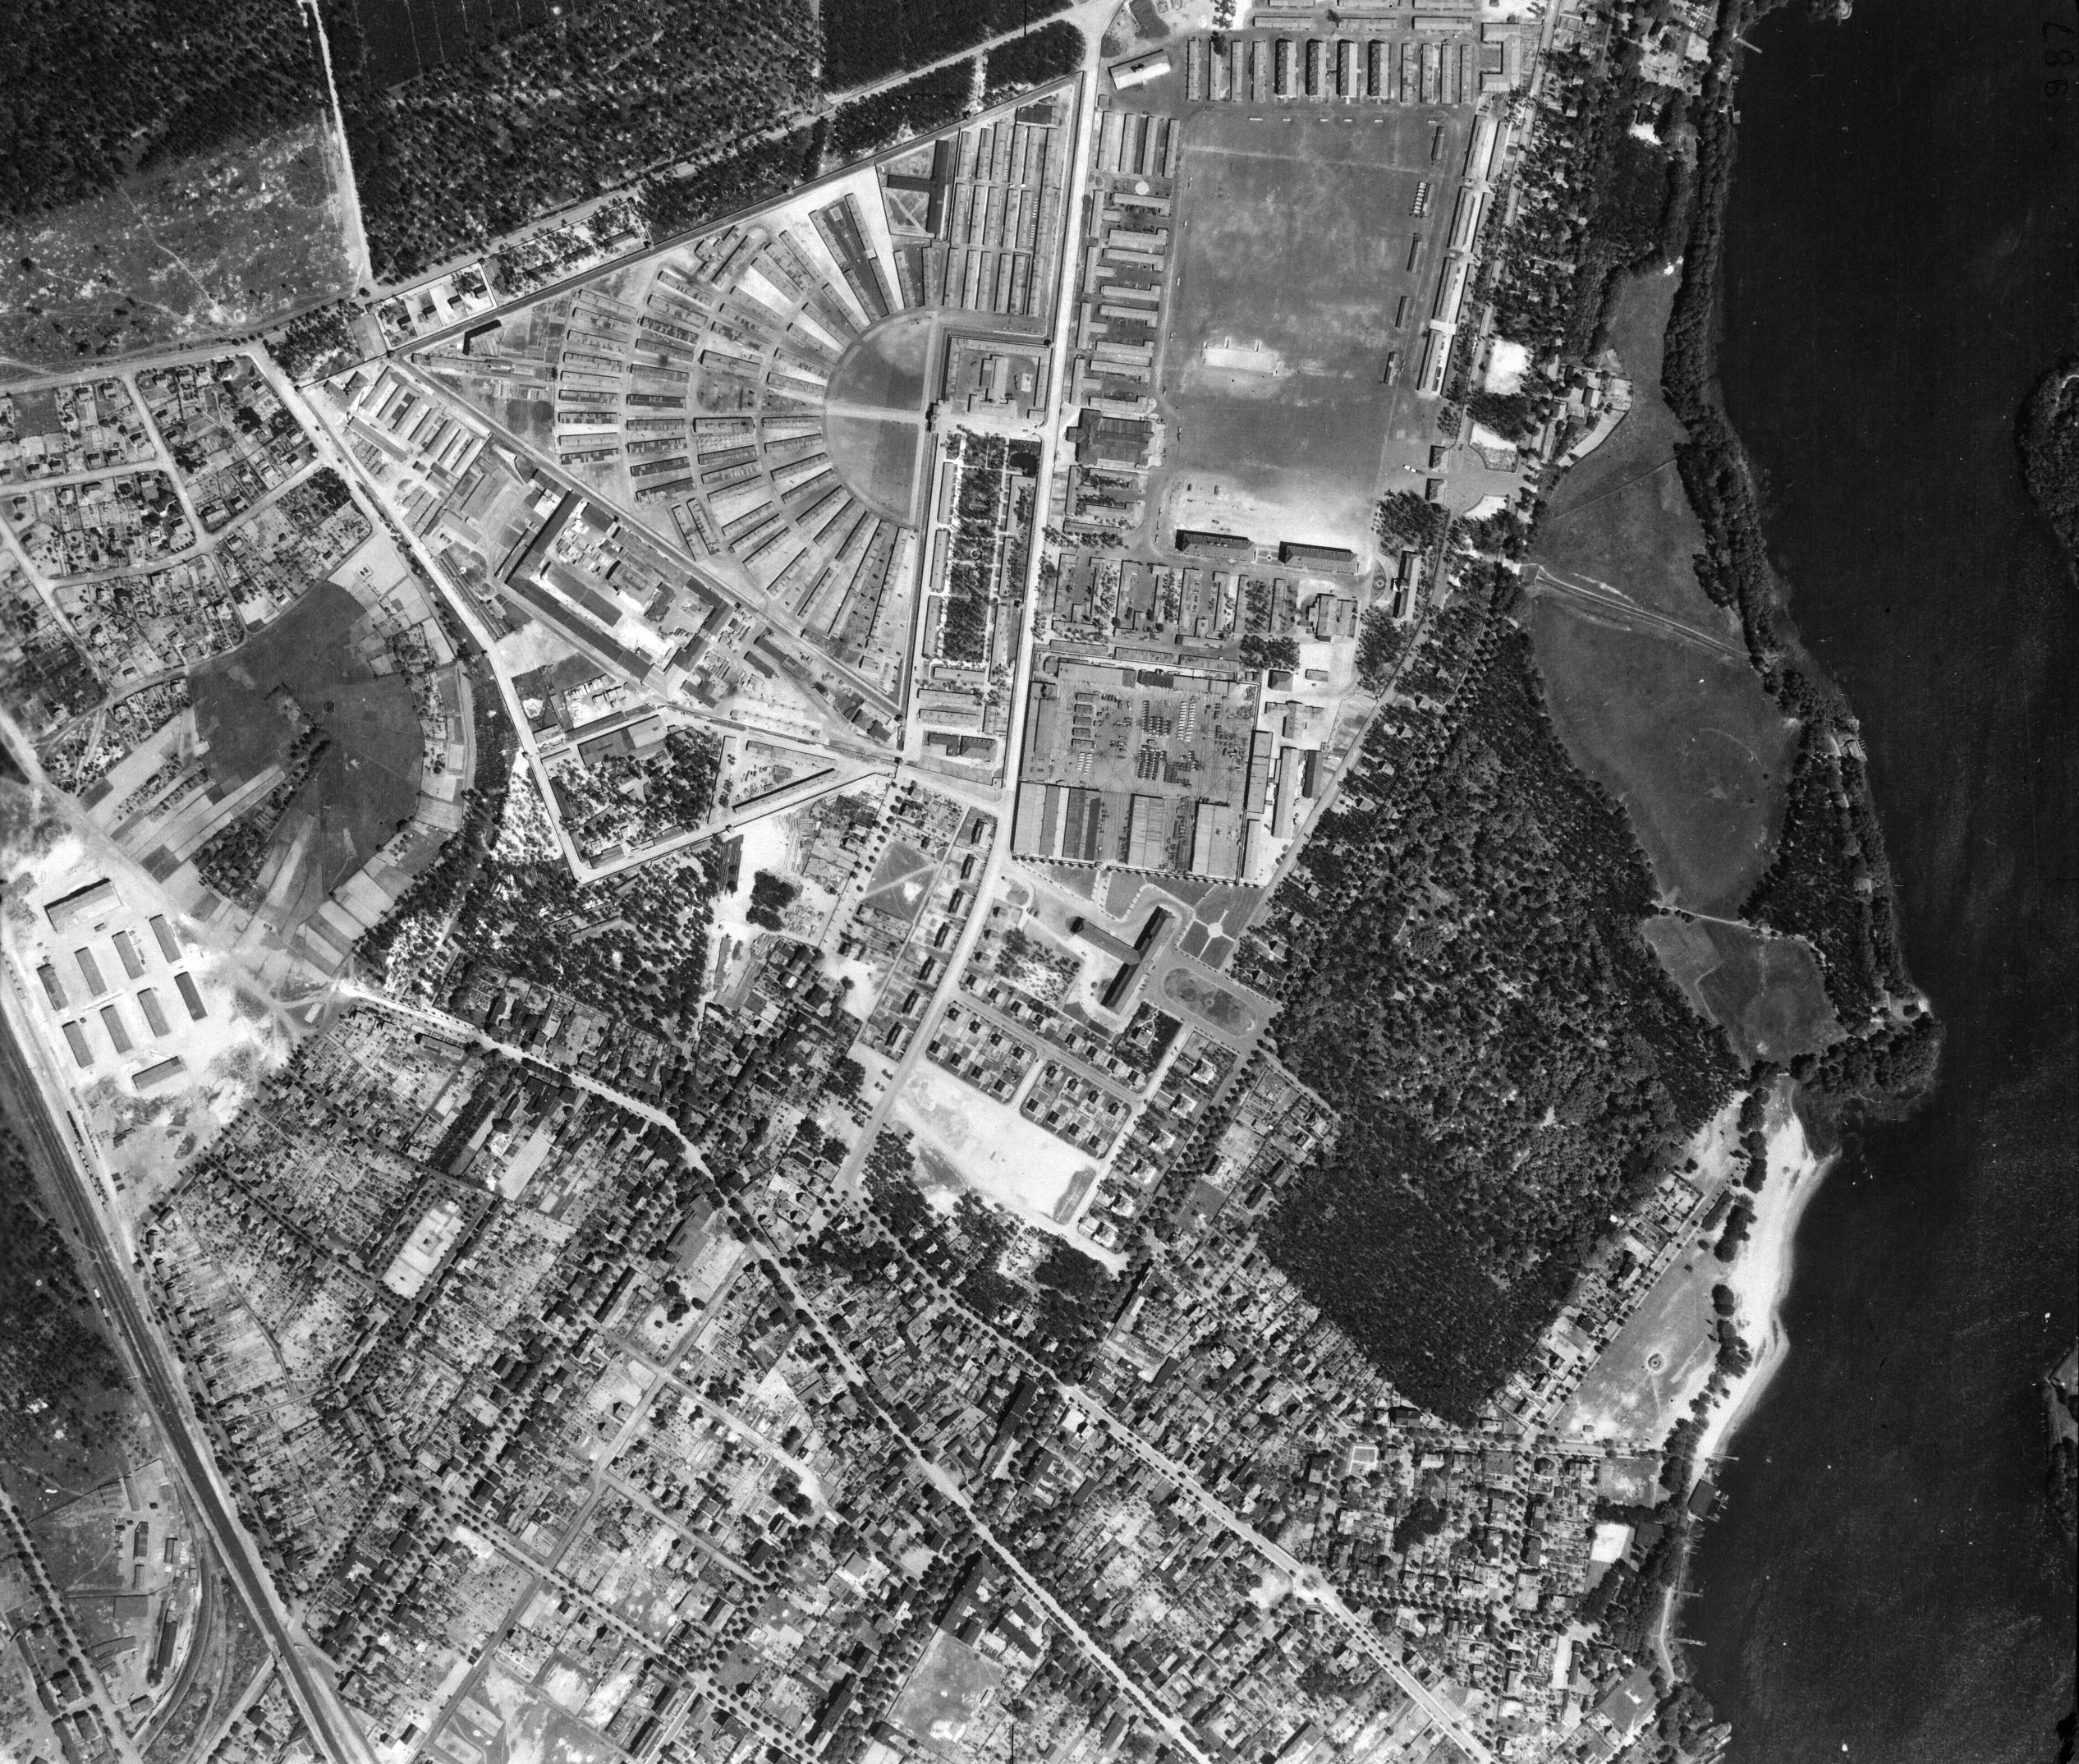 Aerial view of Sachsenhausen Concentration Camp, Germany, 20 May 1943; photo taken by a British No. 542 Squadron RAF aircraft